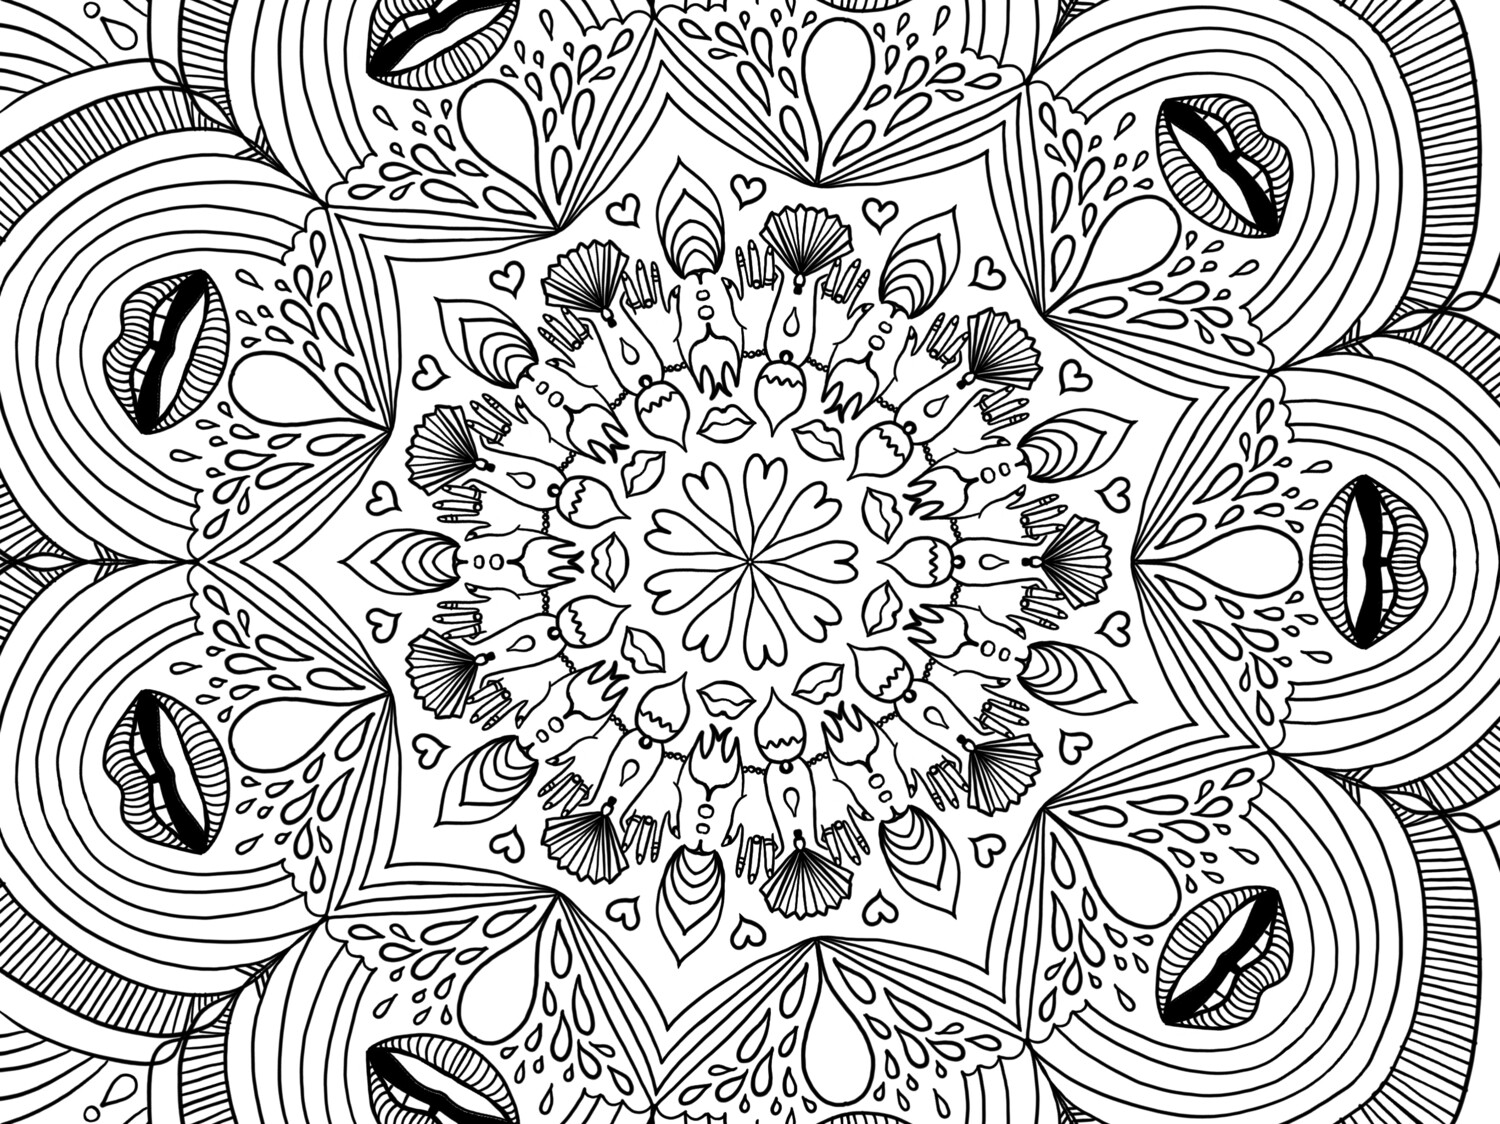 COLORIAGE #2  - Bouches